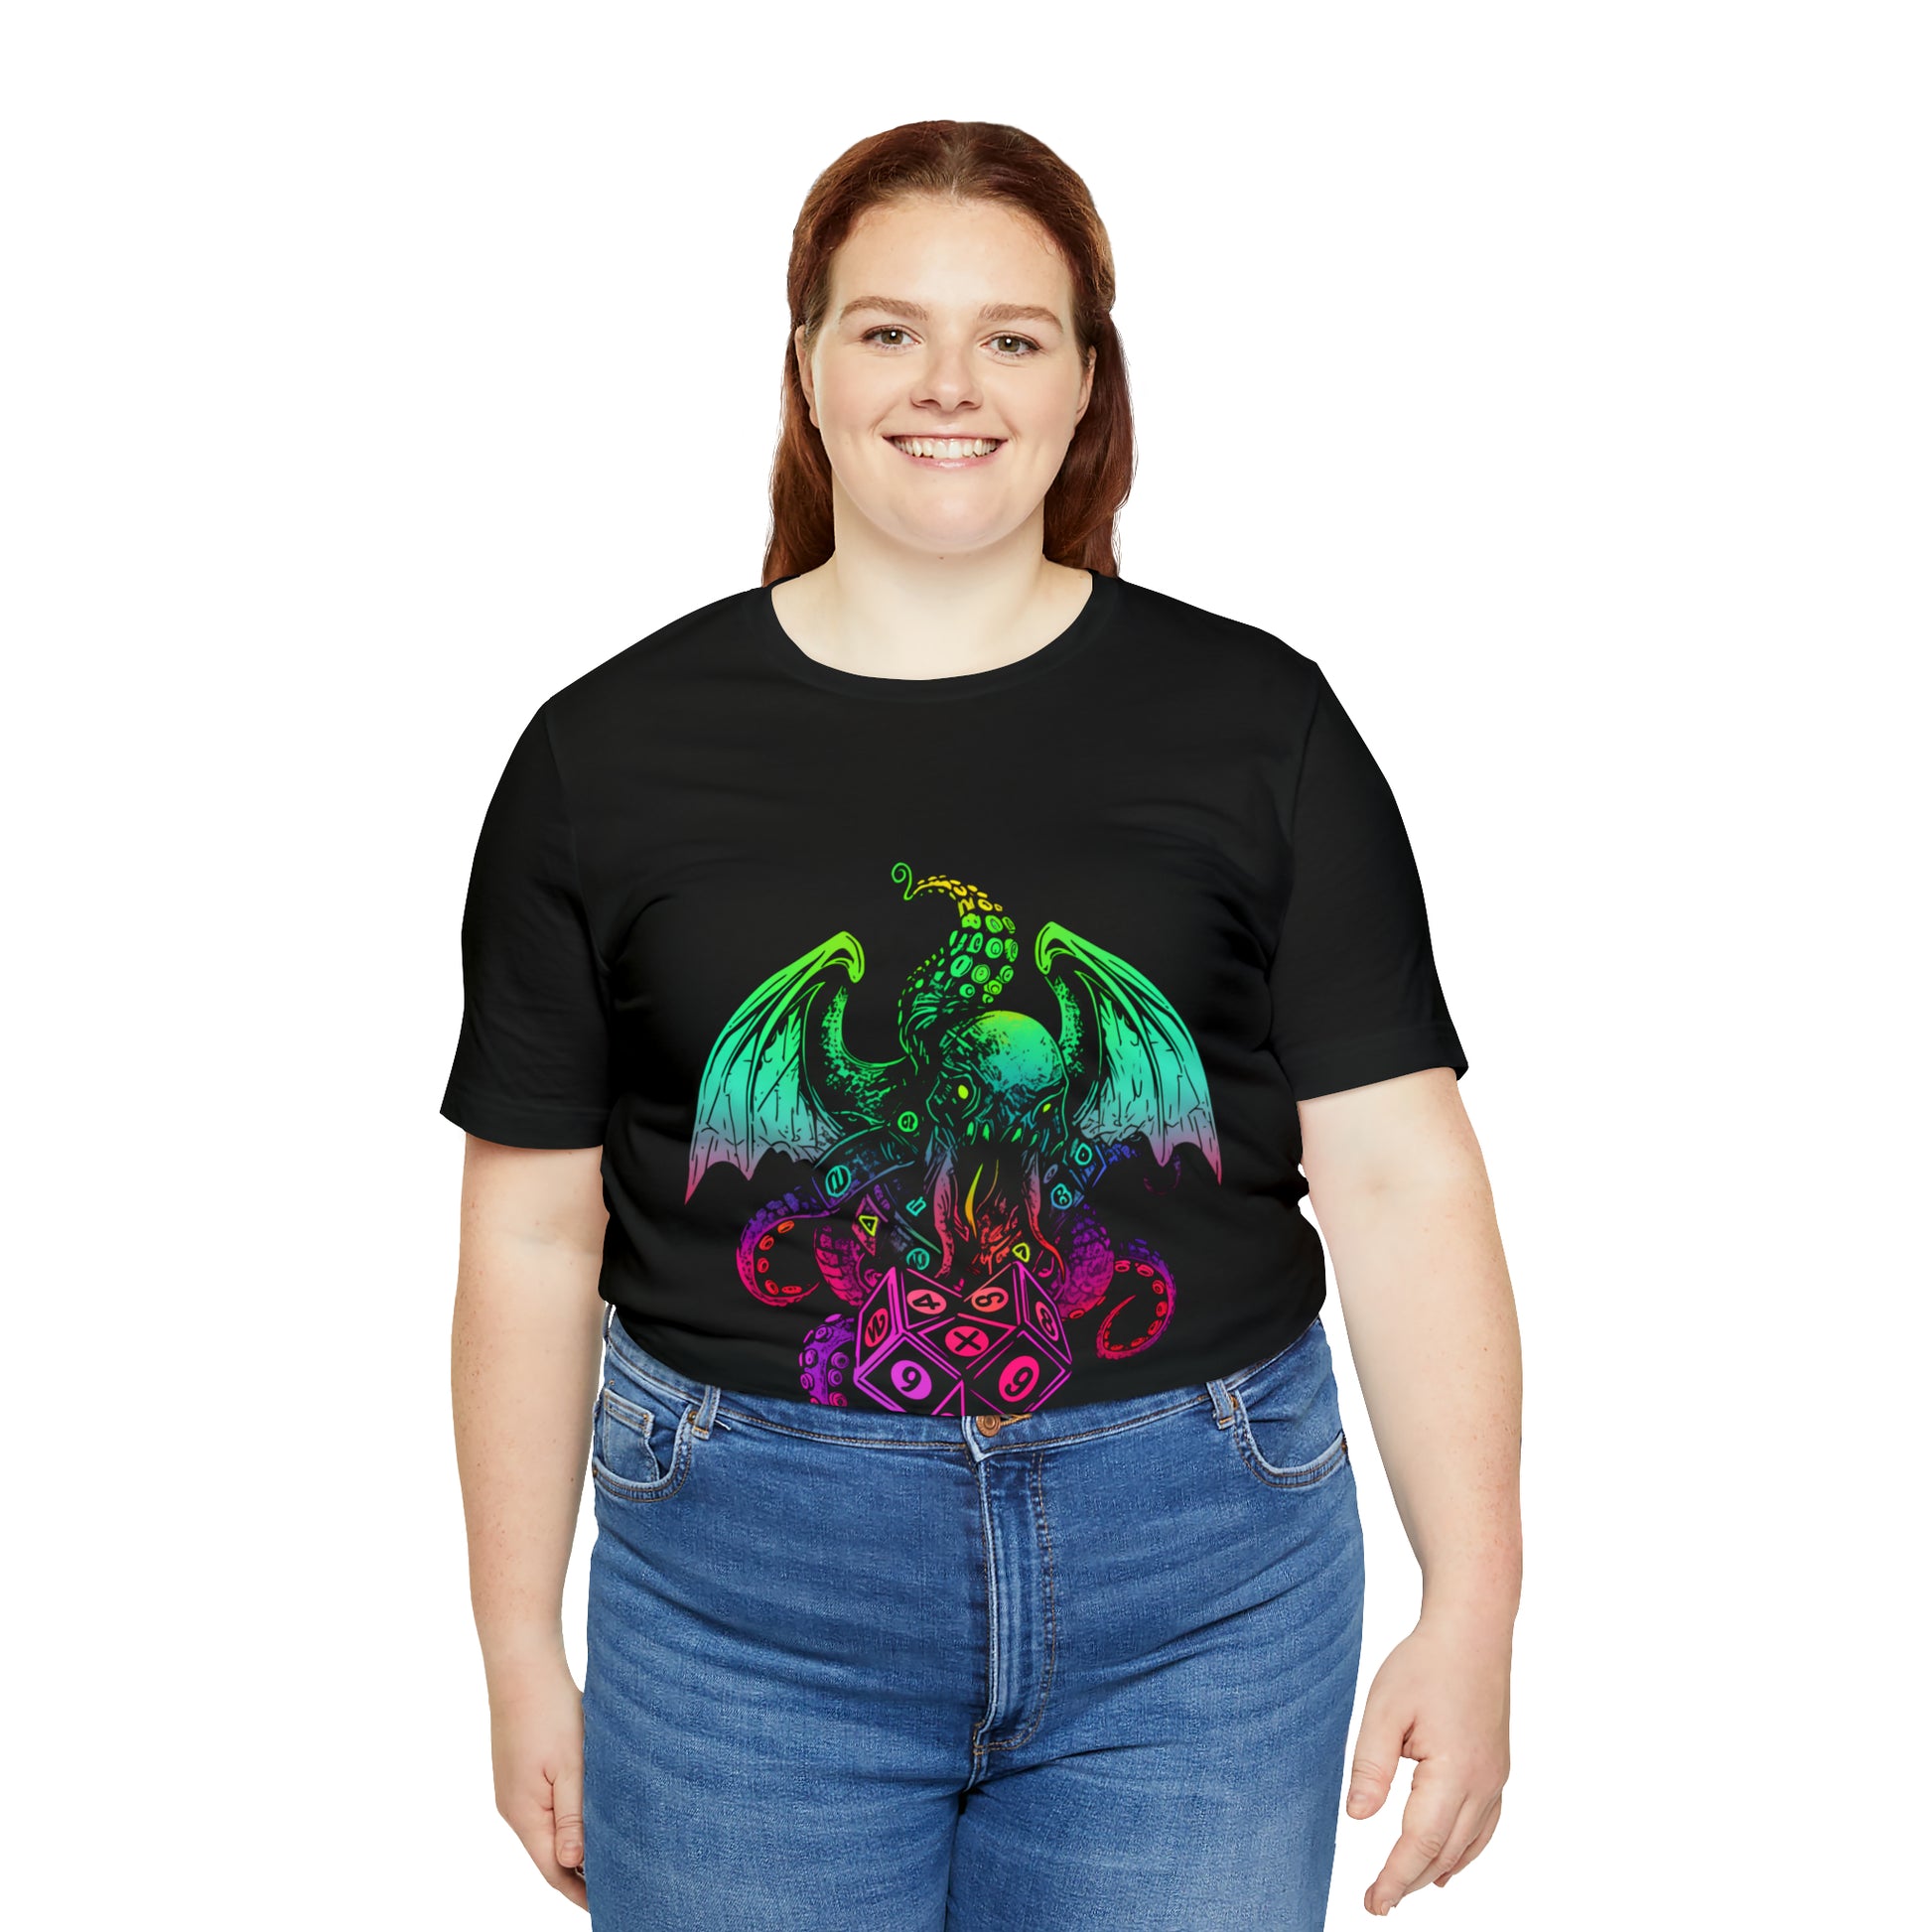 black-quest-thread-tee-shirt-with-neon-cthulhu-monster-dice-on-center